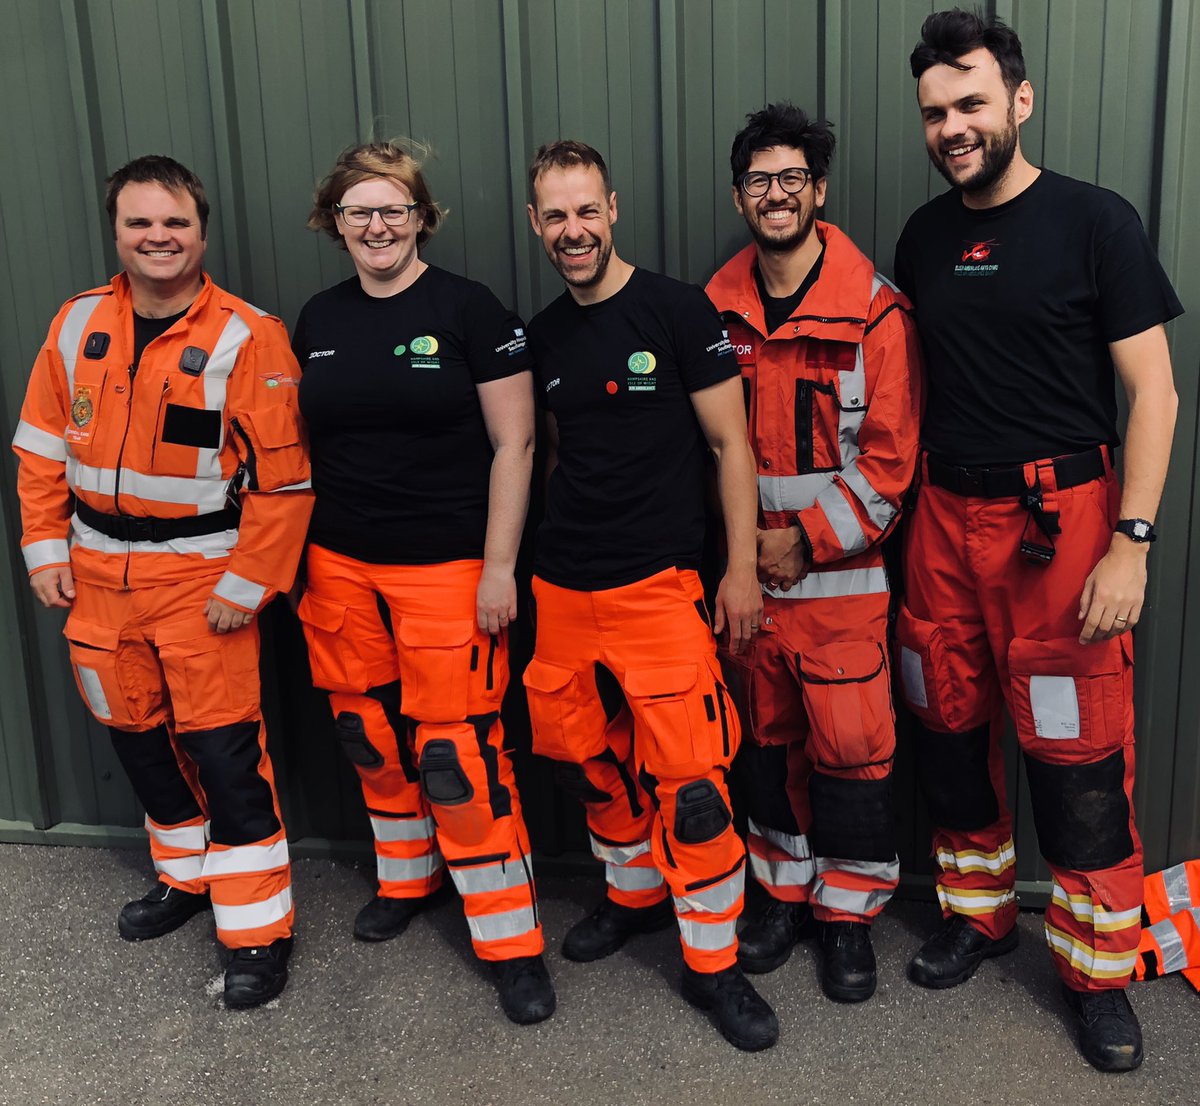 Good luck to the new intake of #PHEM trainees from the #WessexDeanery as you start your training with @HIOWAA @TVAirAmb @GWAAC @EmrtsWales Today we have been learning about major incidents on the #IBTPHEM introductory course.
@_dr_colin @Heavy_AP @dr_al761 @wessexPHEM